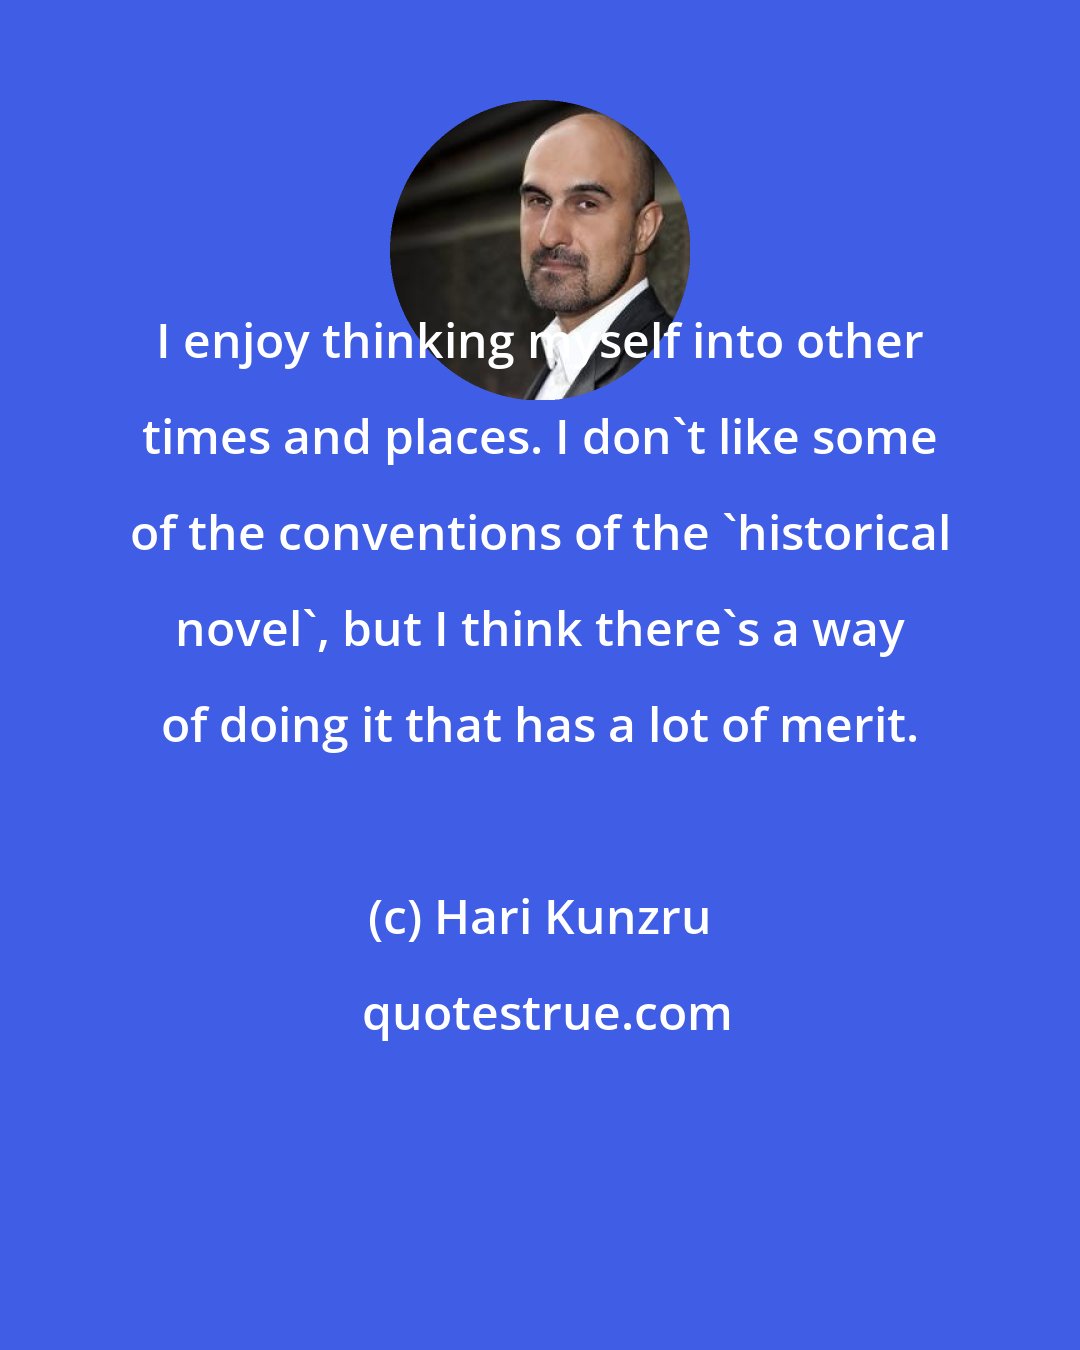 Hari Kunzru: I enjoy thinking myself into other times and places. I don't like some of the conventions of the 'historical novel', but I think there's a way of doing it that has a lot of merit.